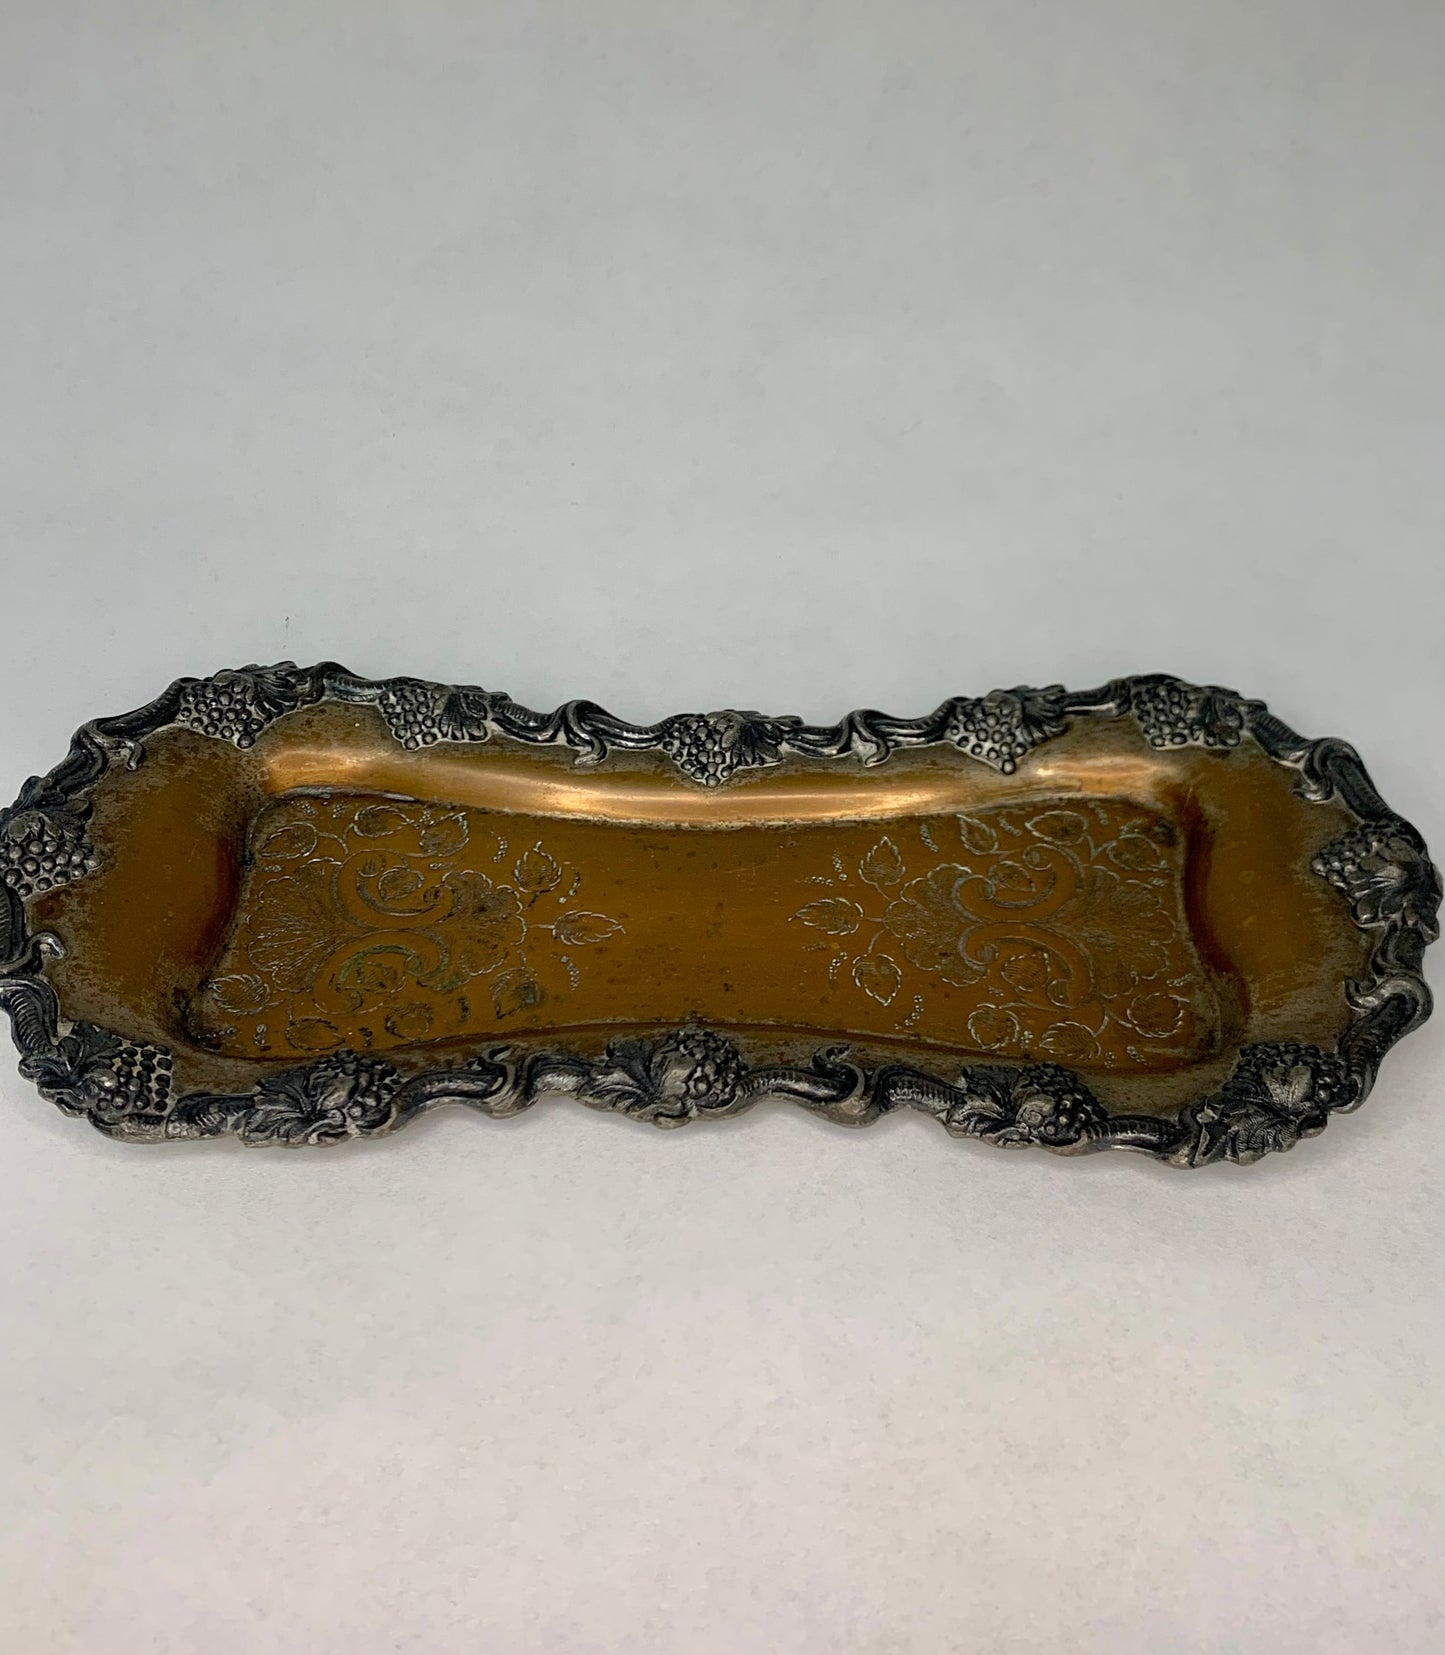 1864 Wick Trimmer and Tray